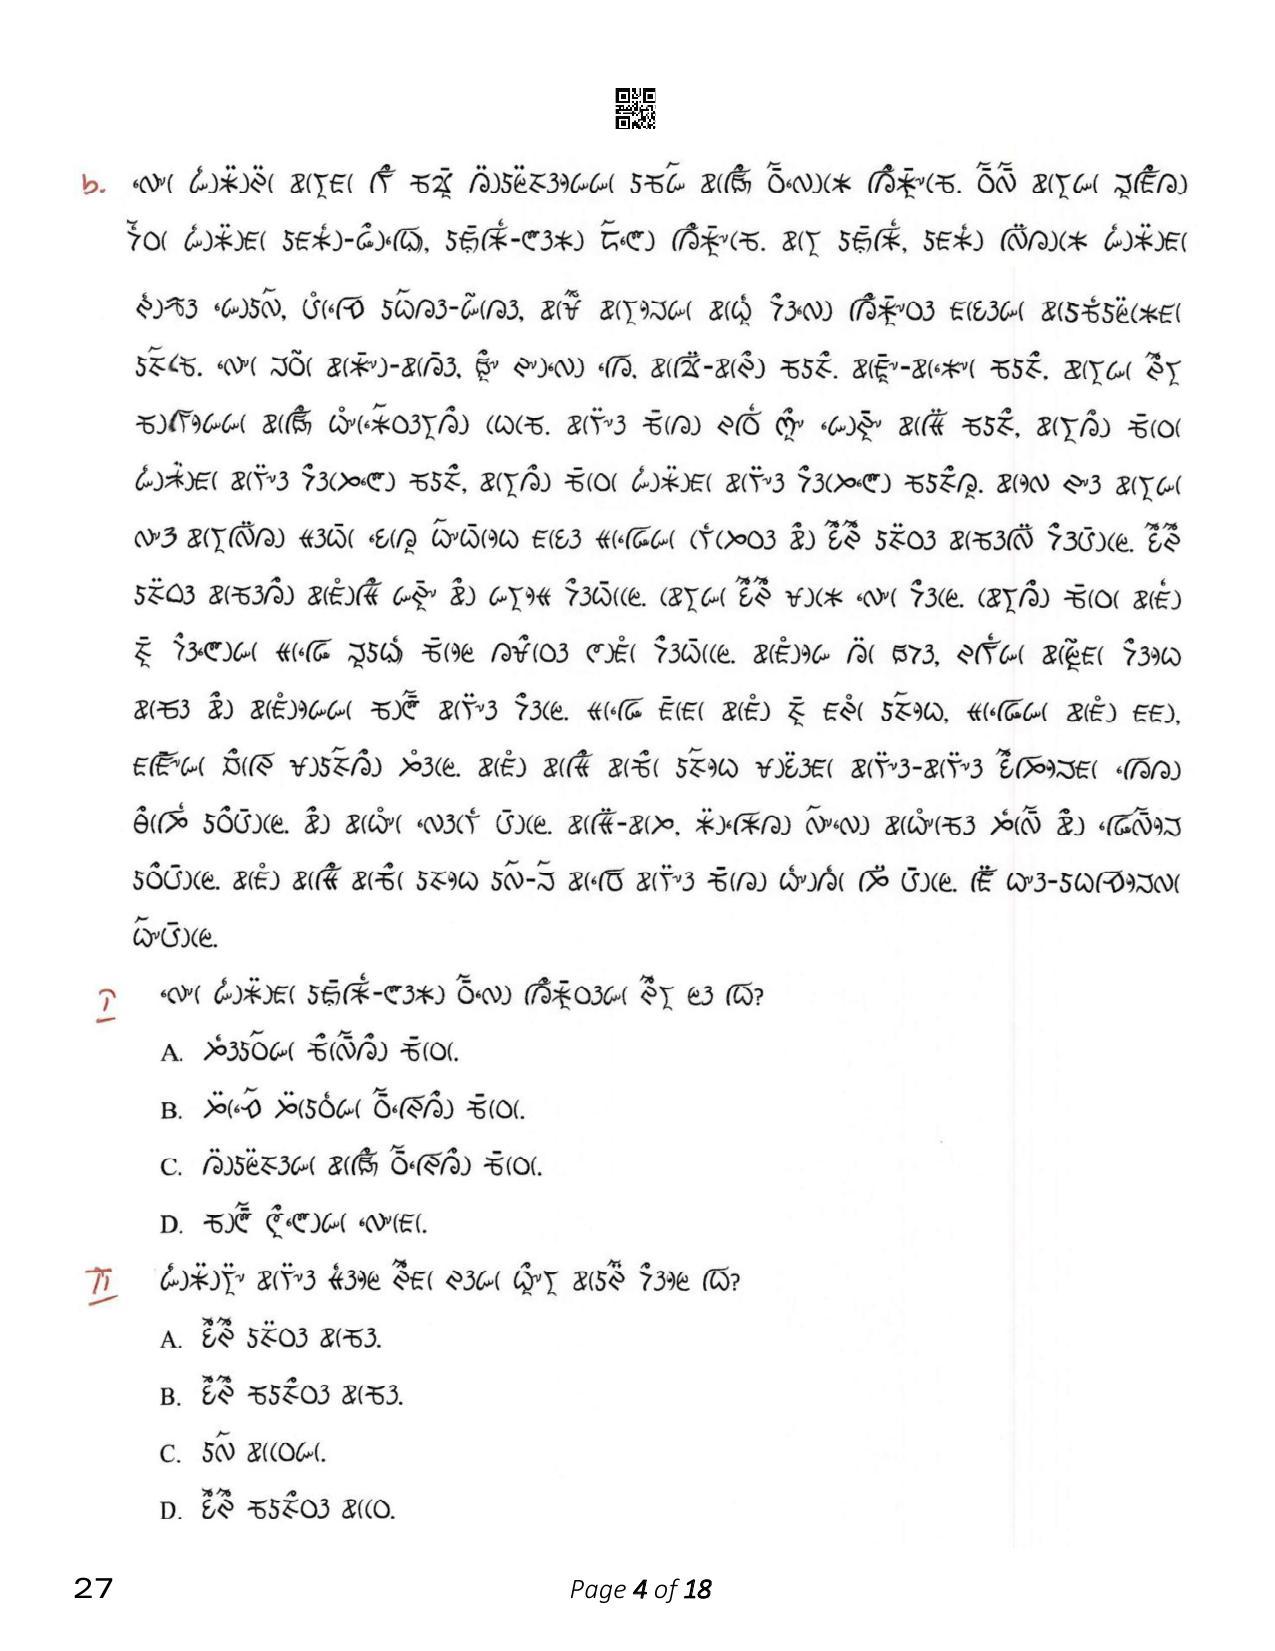 CBSE Class 10 27_Lepcha 2023 Question Paper - Page 4